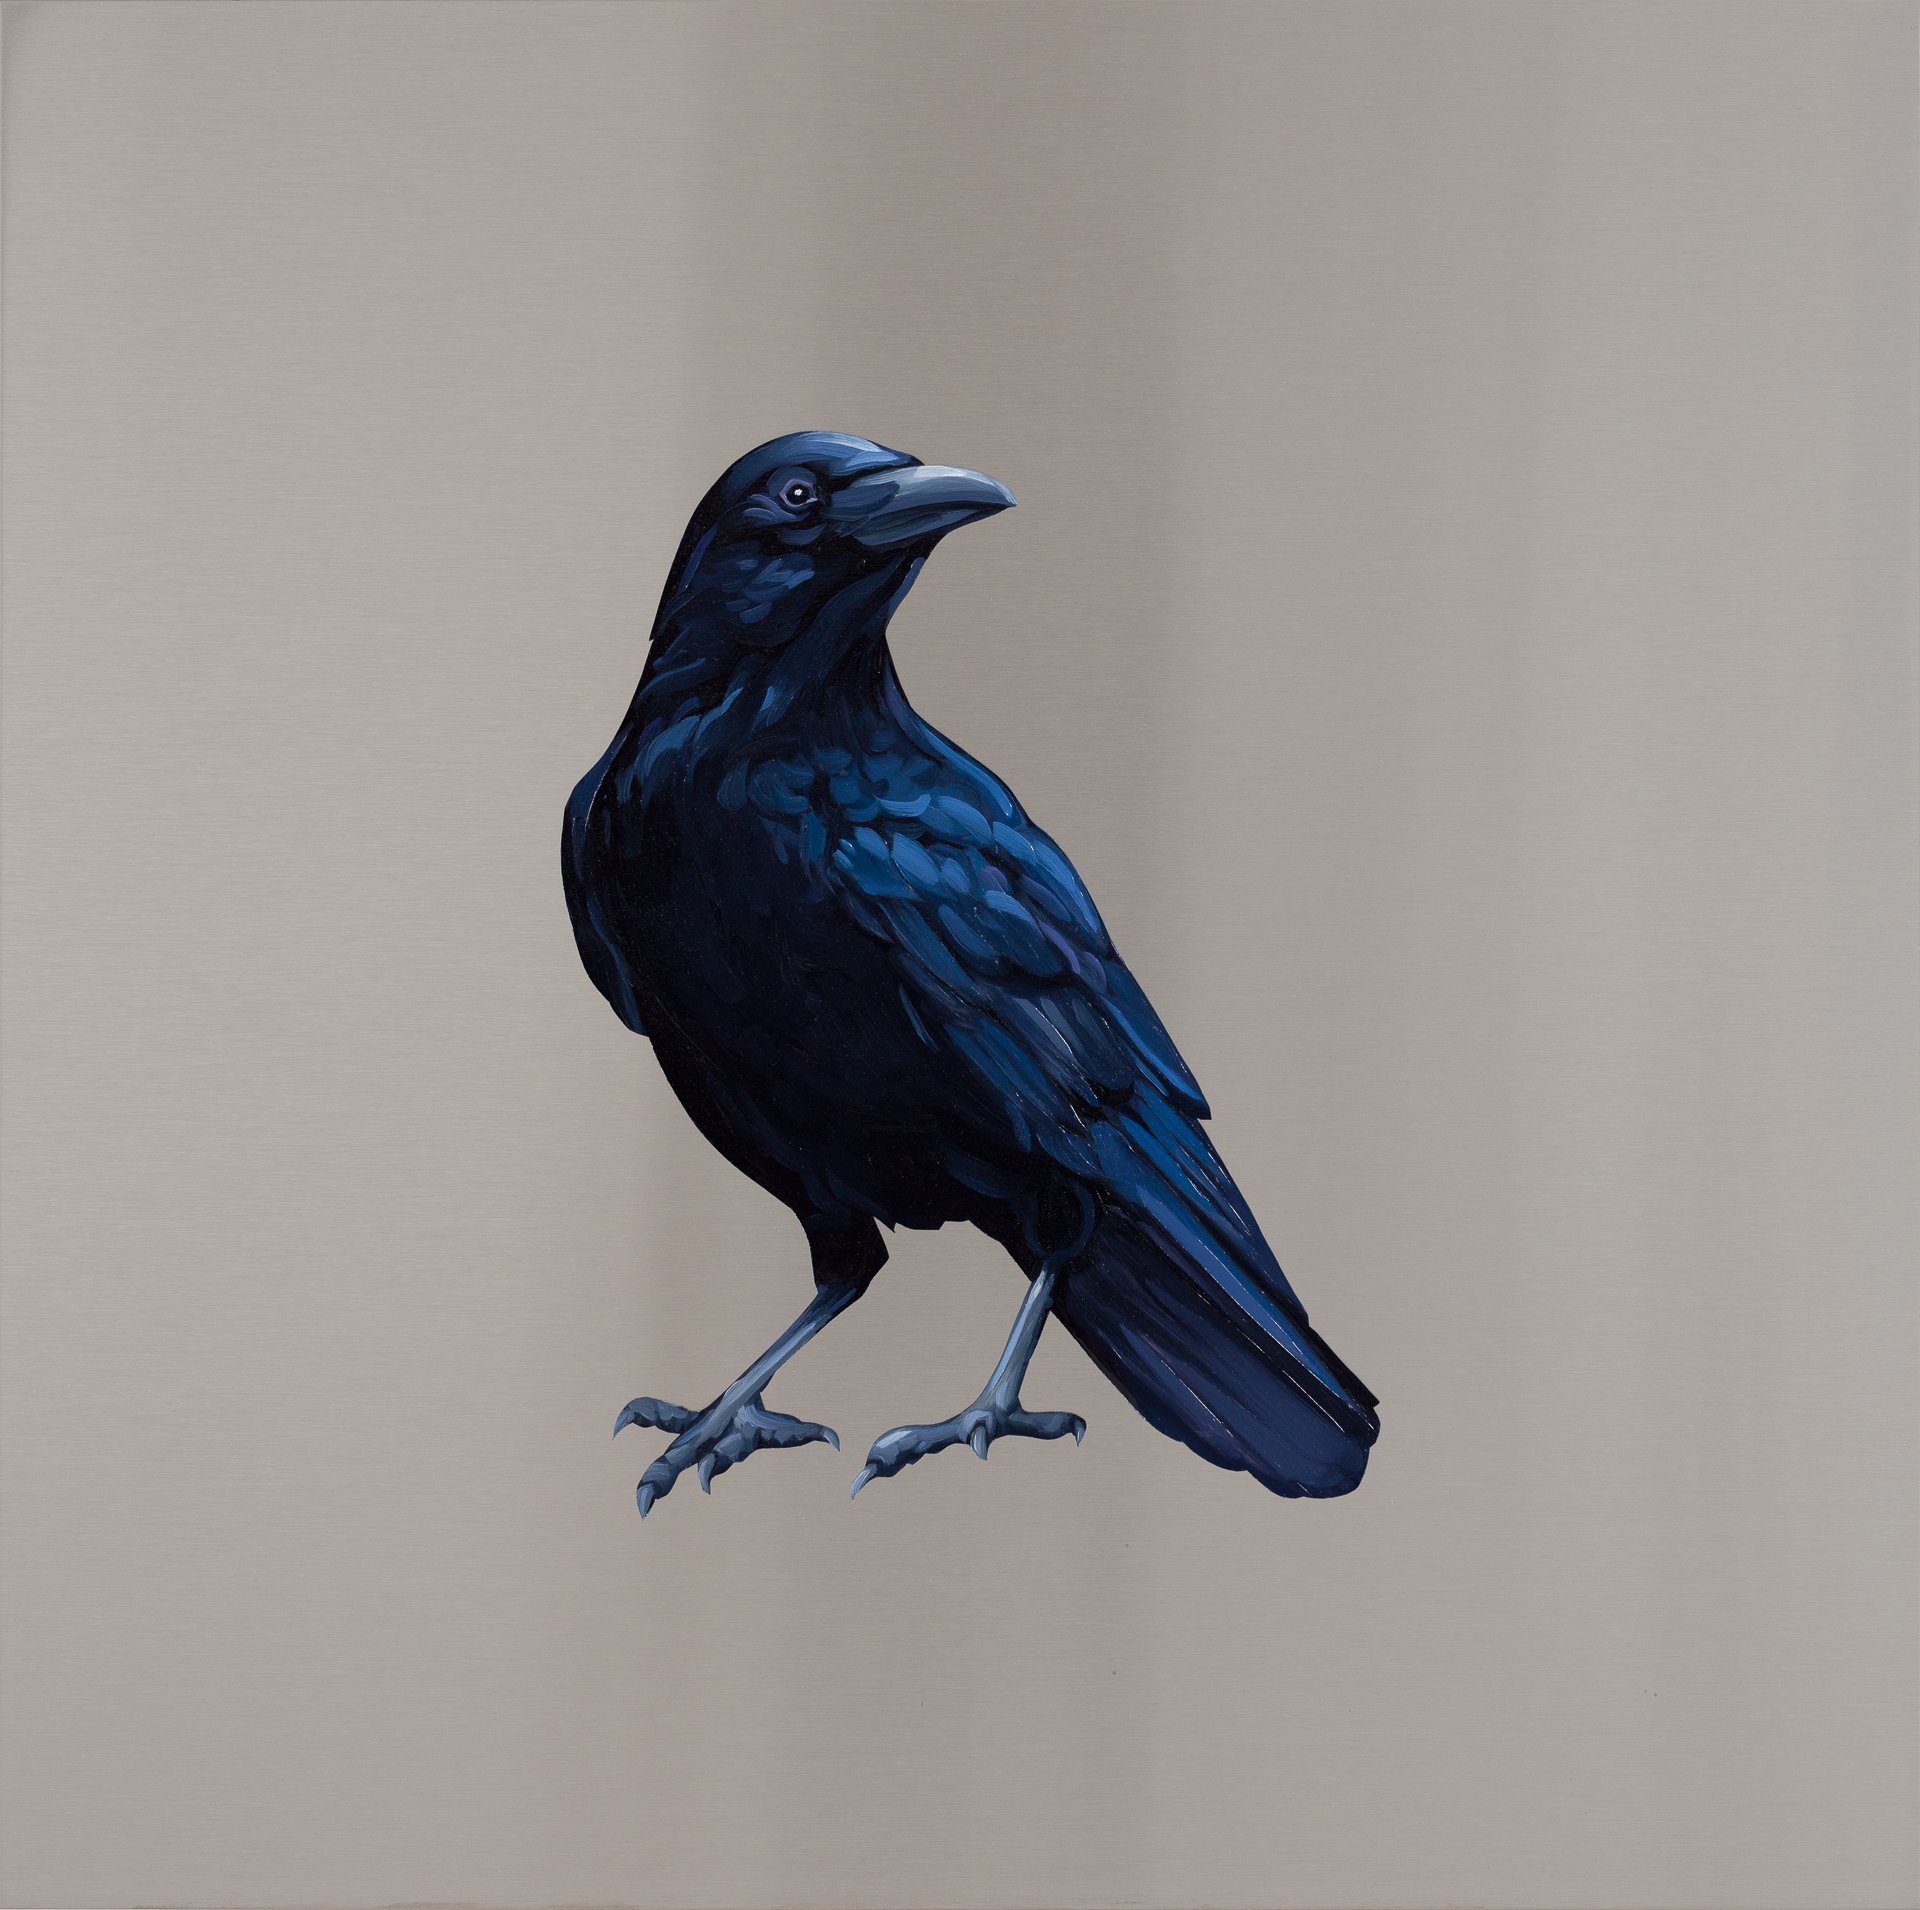  American Crow. Oil on stainless steel, 18in x 18in 